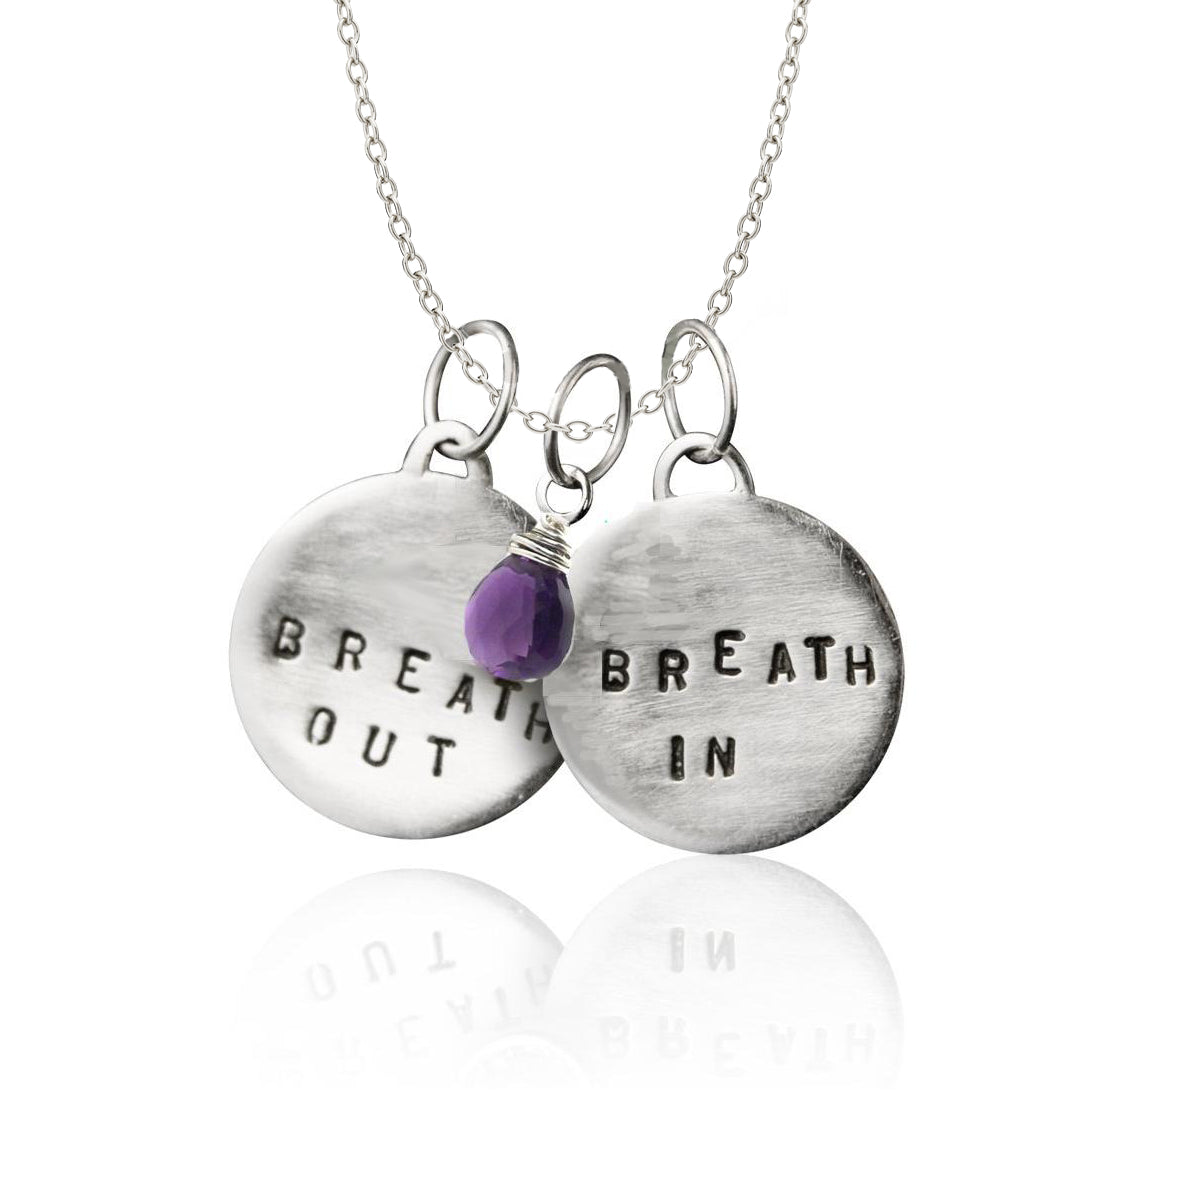 Sterling Silver Breath In - Breath Out Pendants with Amethyst for Calming Emotions on a sterling silver necklace - inspired by my scuba diving, yoga and being a mom.